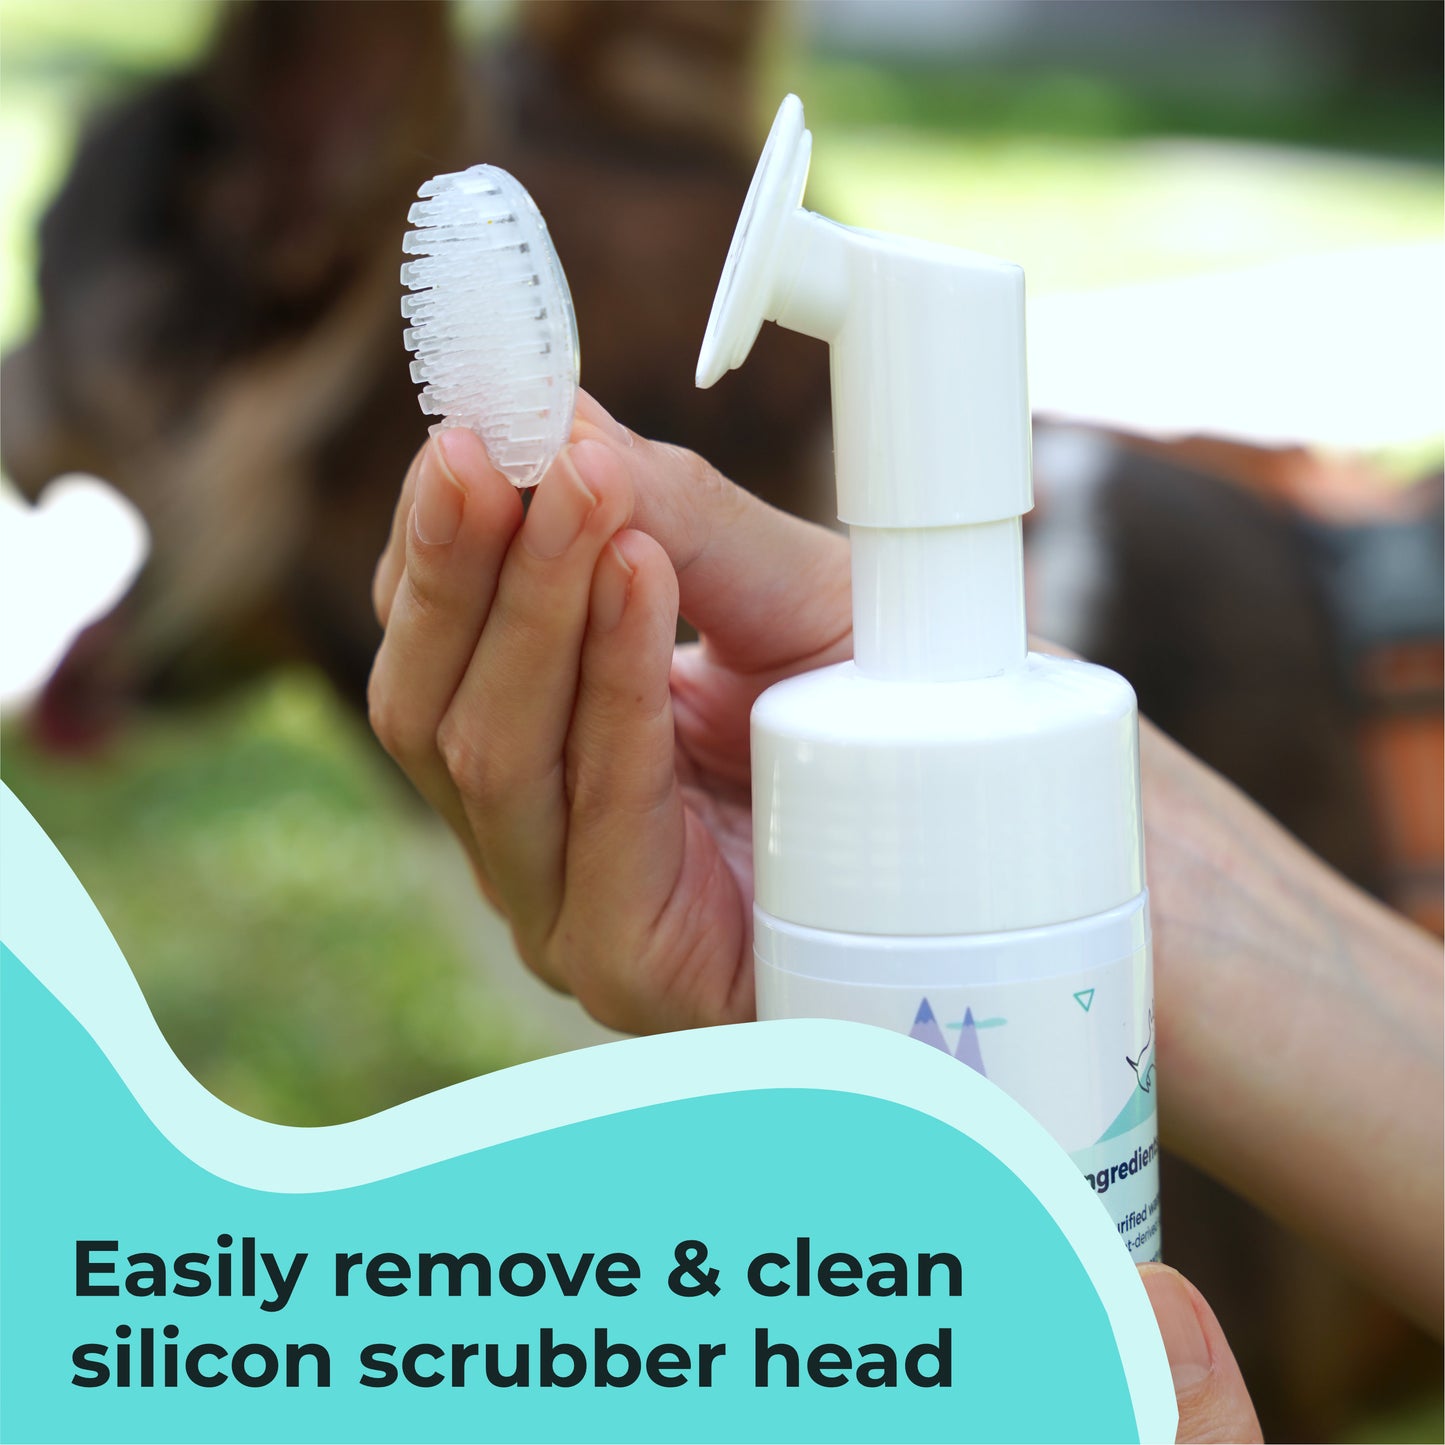 Easily remove and clean silicon scrubber head